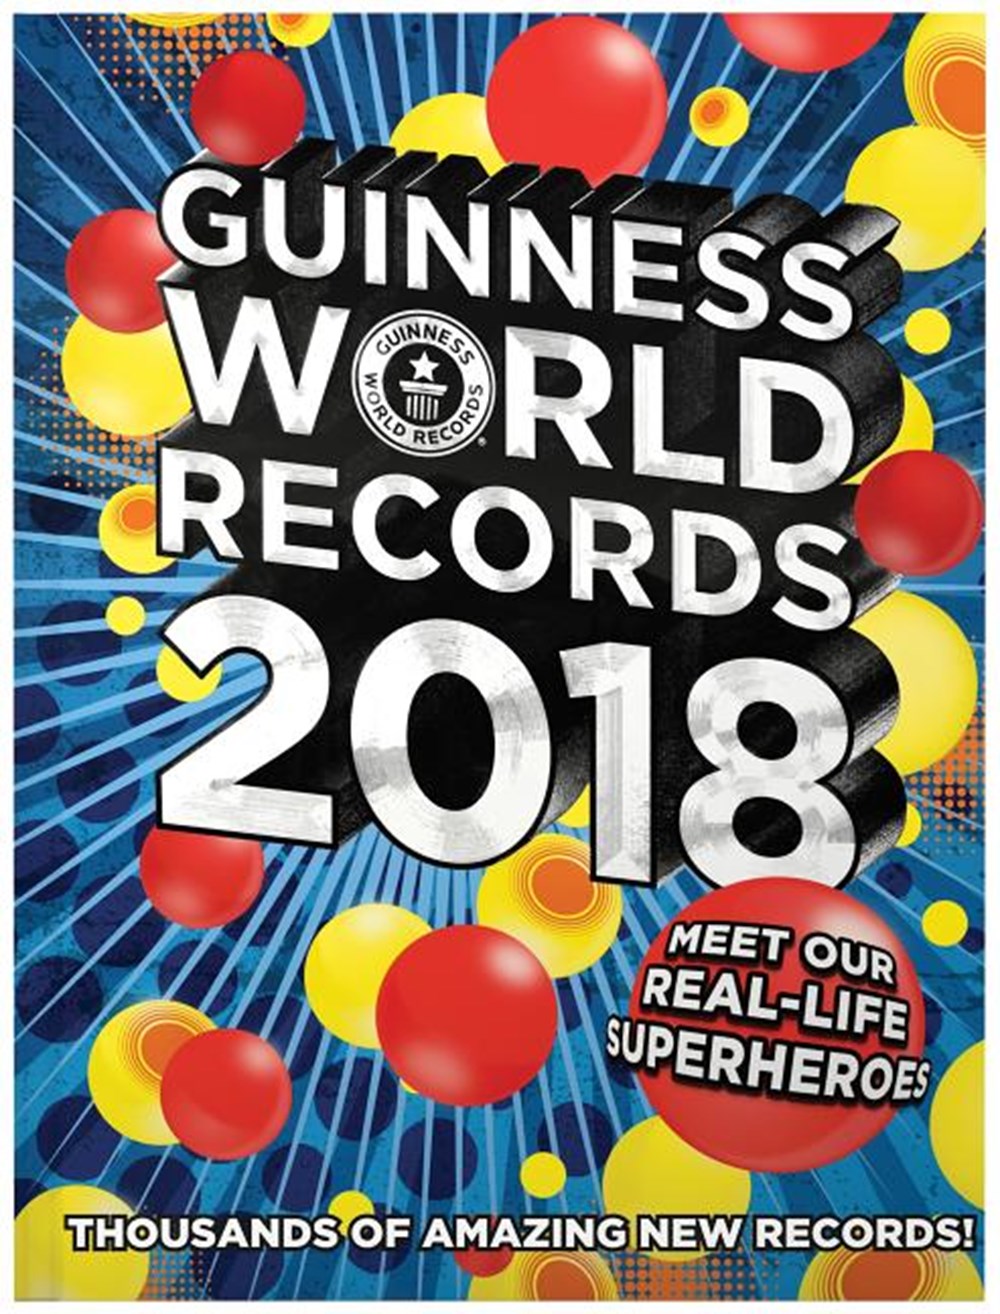 Guinness World Records 2018: Meet Our Real-Life Superheroes (2018)